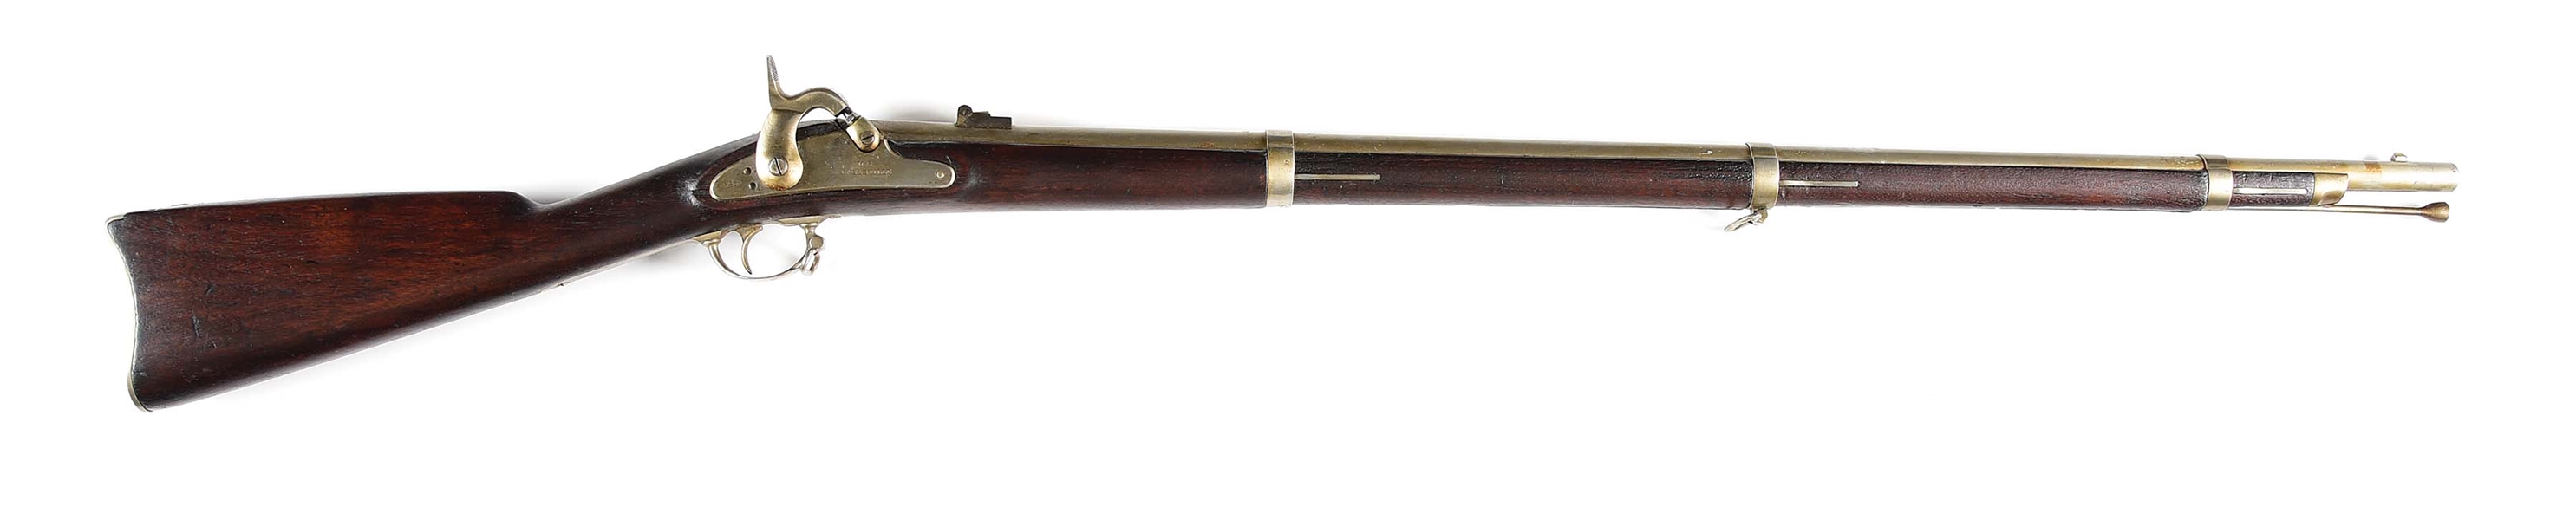 (A) VERY SCARCE EAGLEVILLE MODEL 1861 CONTRACT .58 CALIBER CIVIL WAR RIFLED MUSKET DATED 1863.